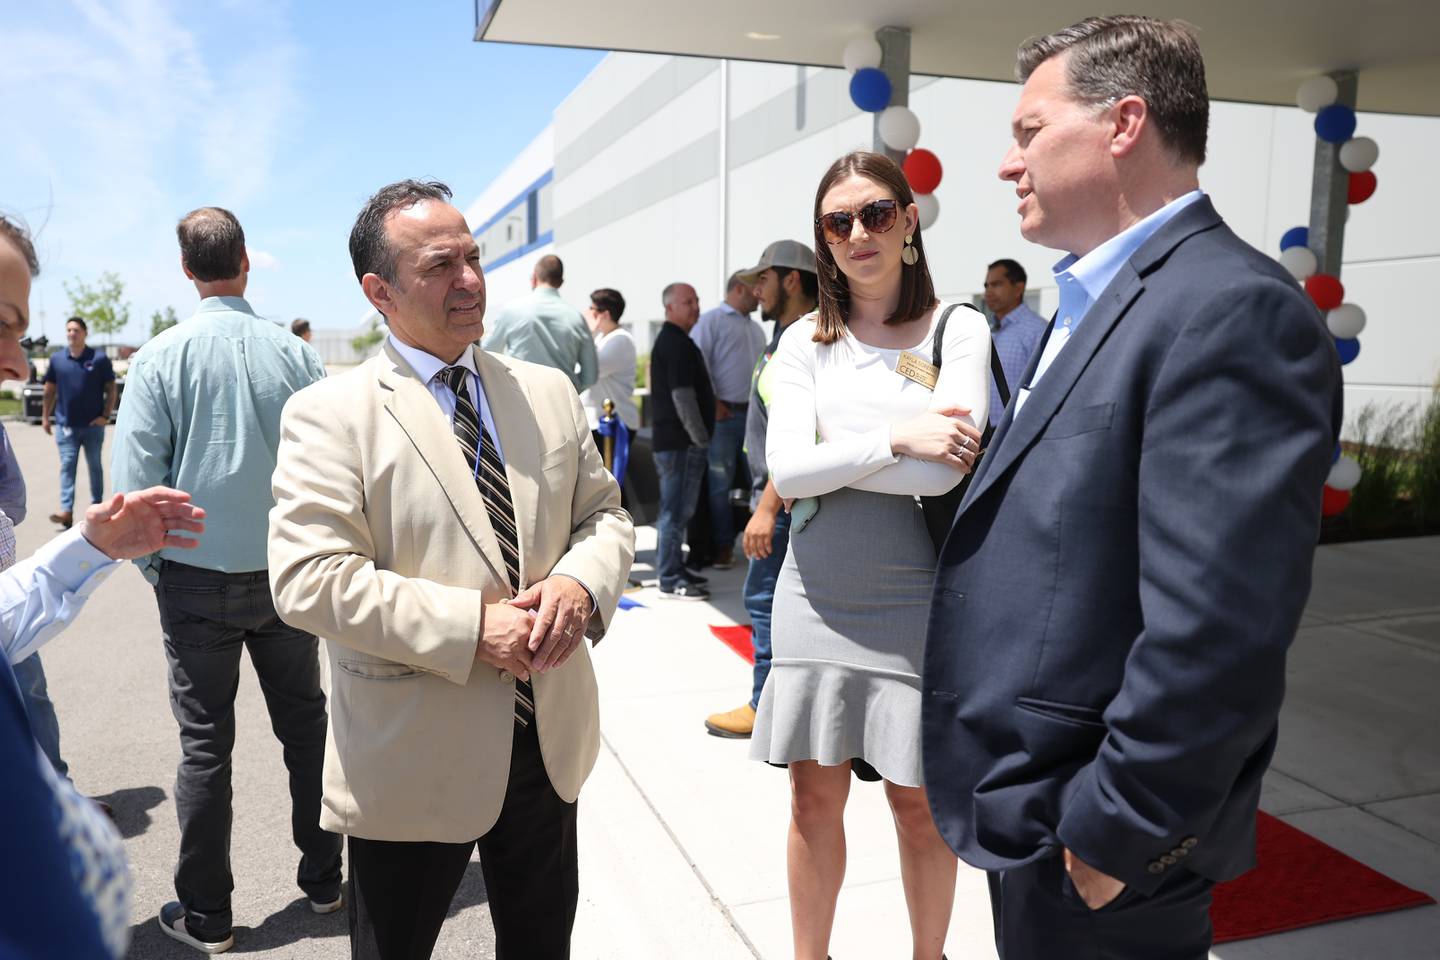 Joliet Economic Development Director Cesar Suarez, left, speaks with Will County Center for Economic Development representatives Kayla Sorensen and Doug Pryor at the ribbon cutting ceremony for the new Harbor Freight distribution facility in Joliet. Harbor Freight opened a new 1.6 million square-foot distribution center in Joliet that is expected to bring 800 new jobs to the area. Thursday, June 9, 2022 in Joliet.